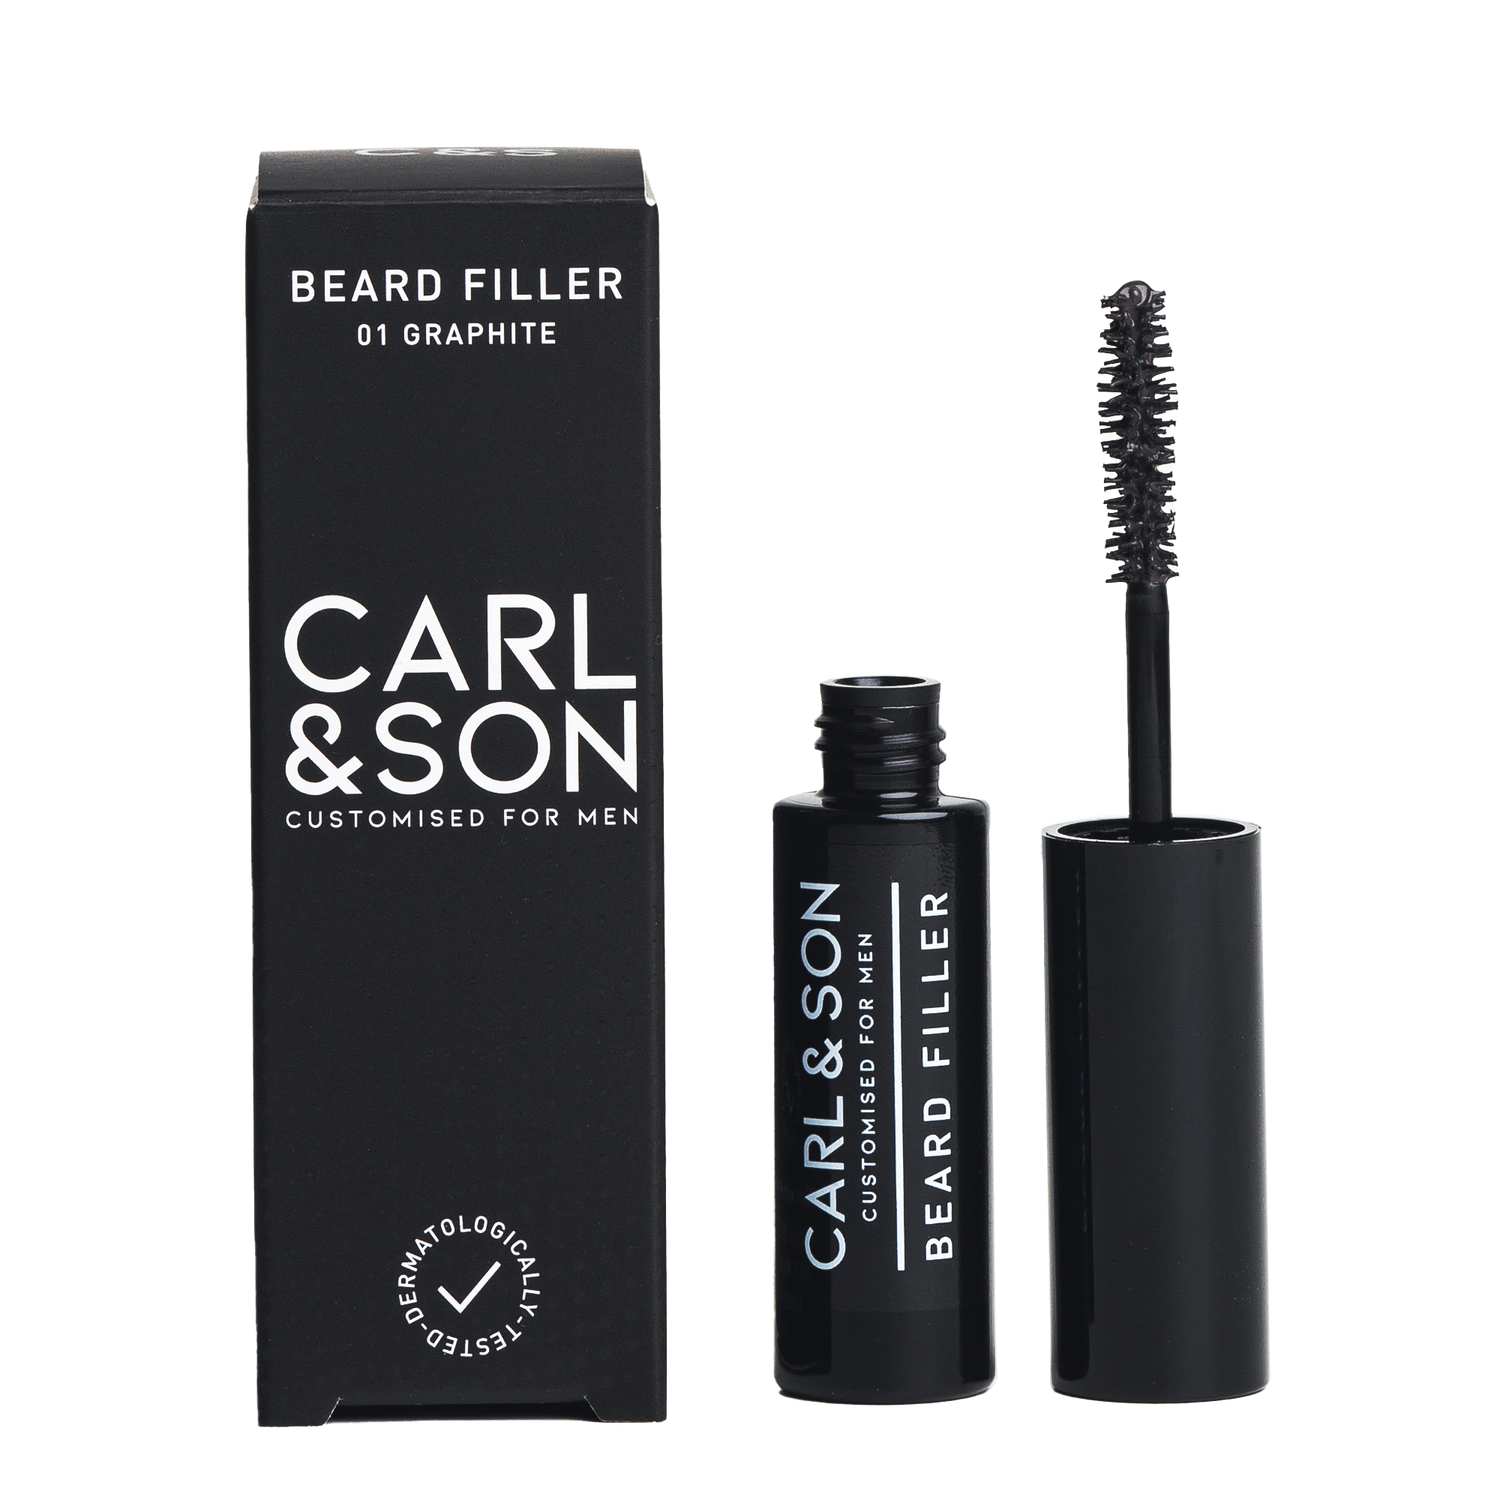 beard filler cartonage and open product showing the wand